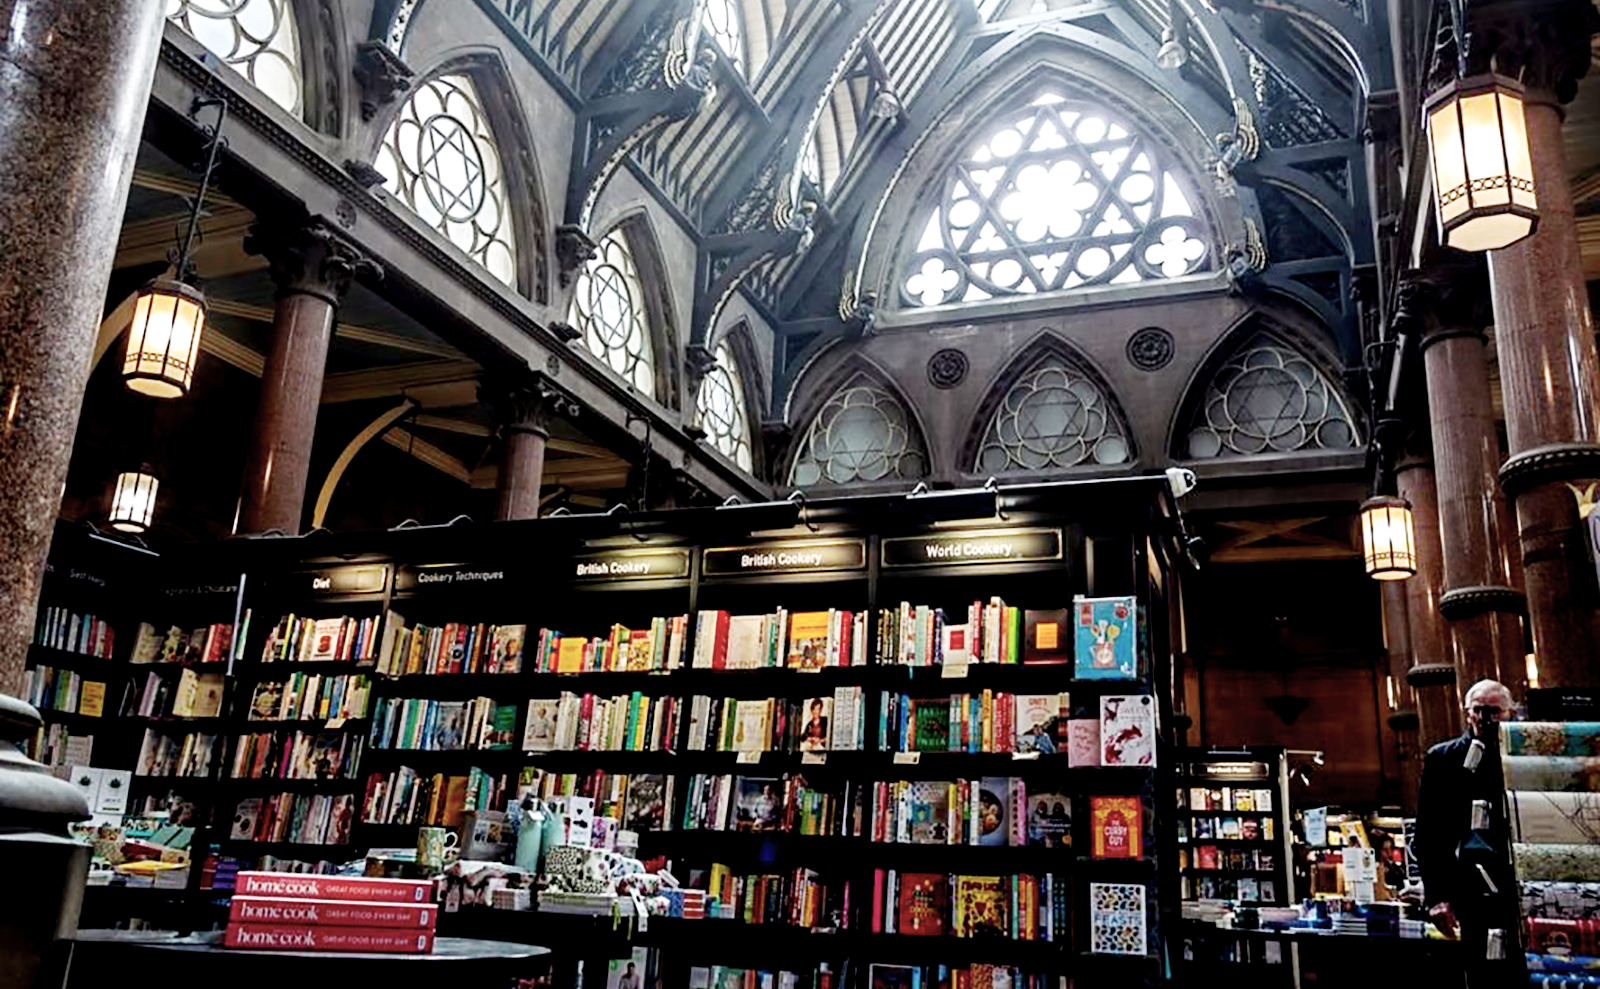 Waterstones in Bradford, UK is a Cathedral of Books